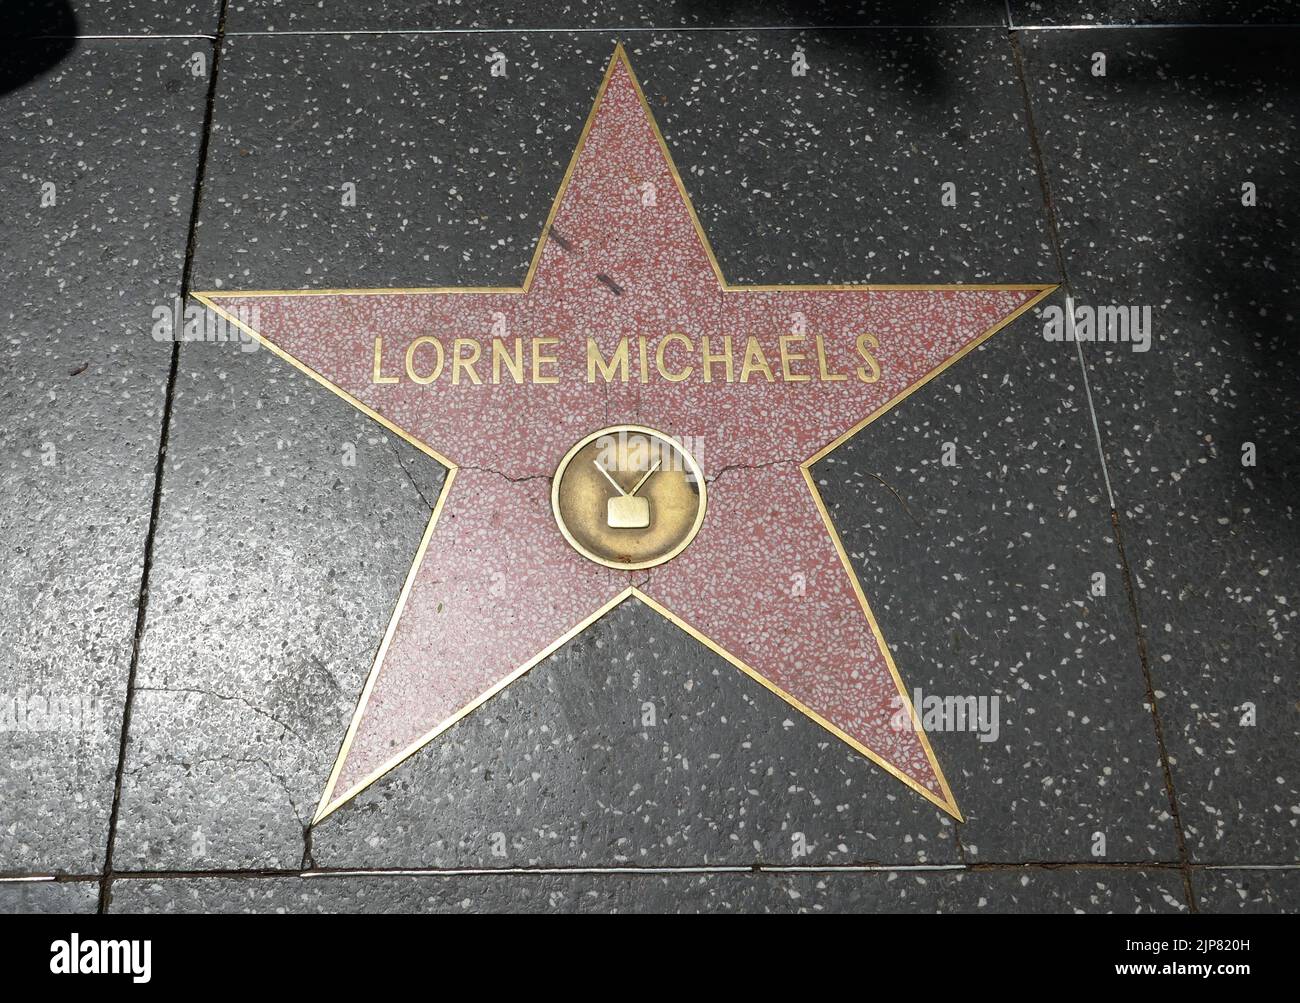 Los Angeles, California, USA 15th August 2022 Lorne Michaels Hollywood Walk of Fame Star on Hollywood Walk of Fame on August 15, 2022 in Los Angeles, California, USA. Photo by Barry King/Alamy Stock Photo Stock Photo